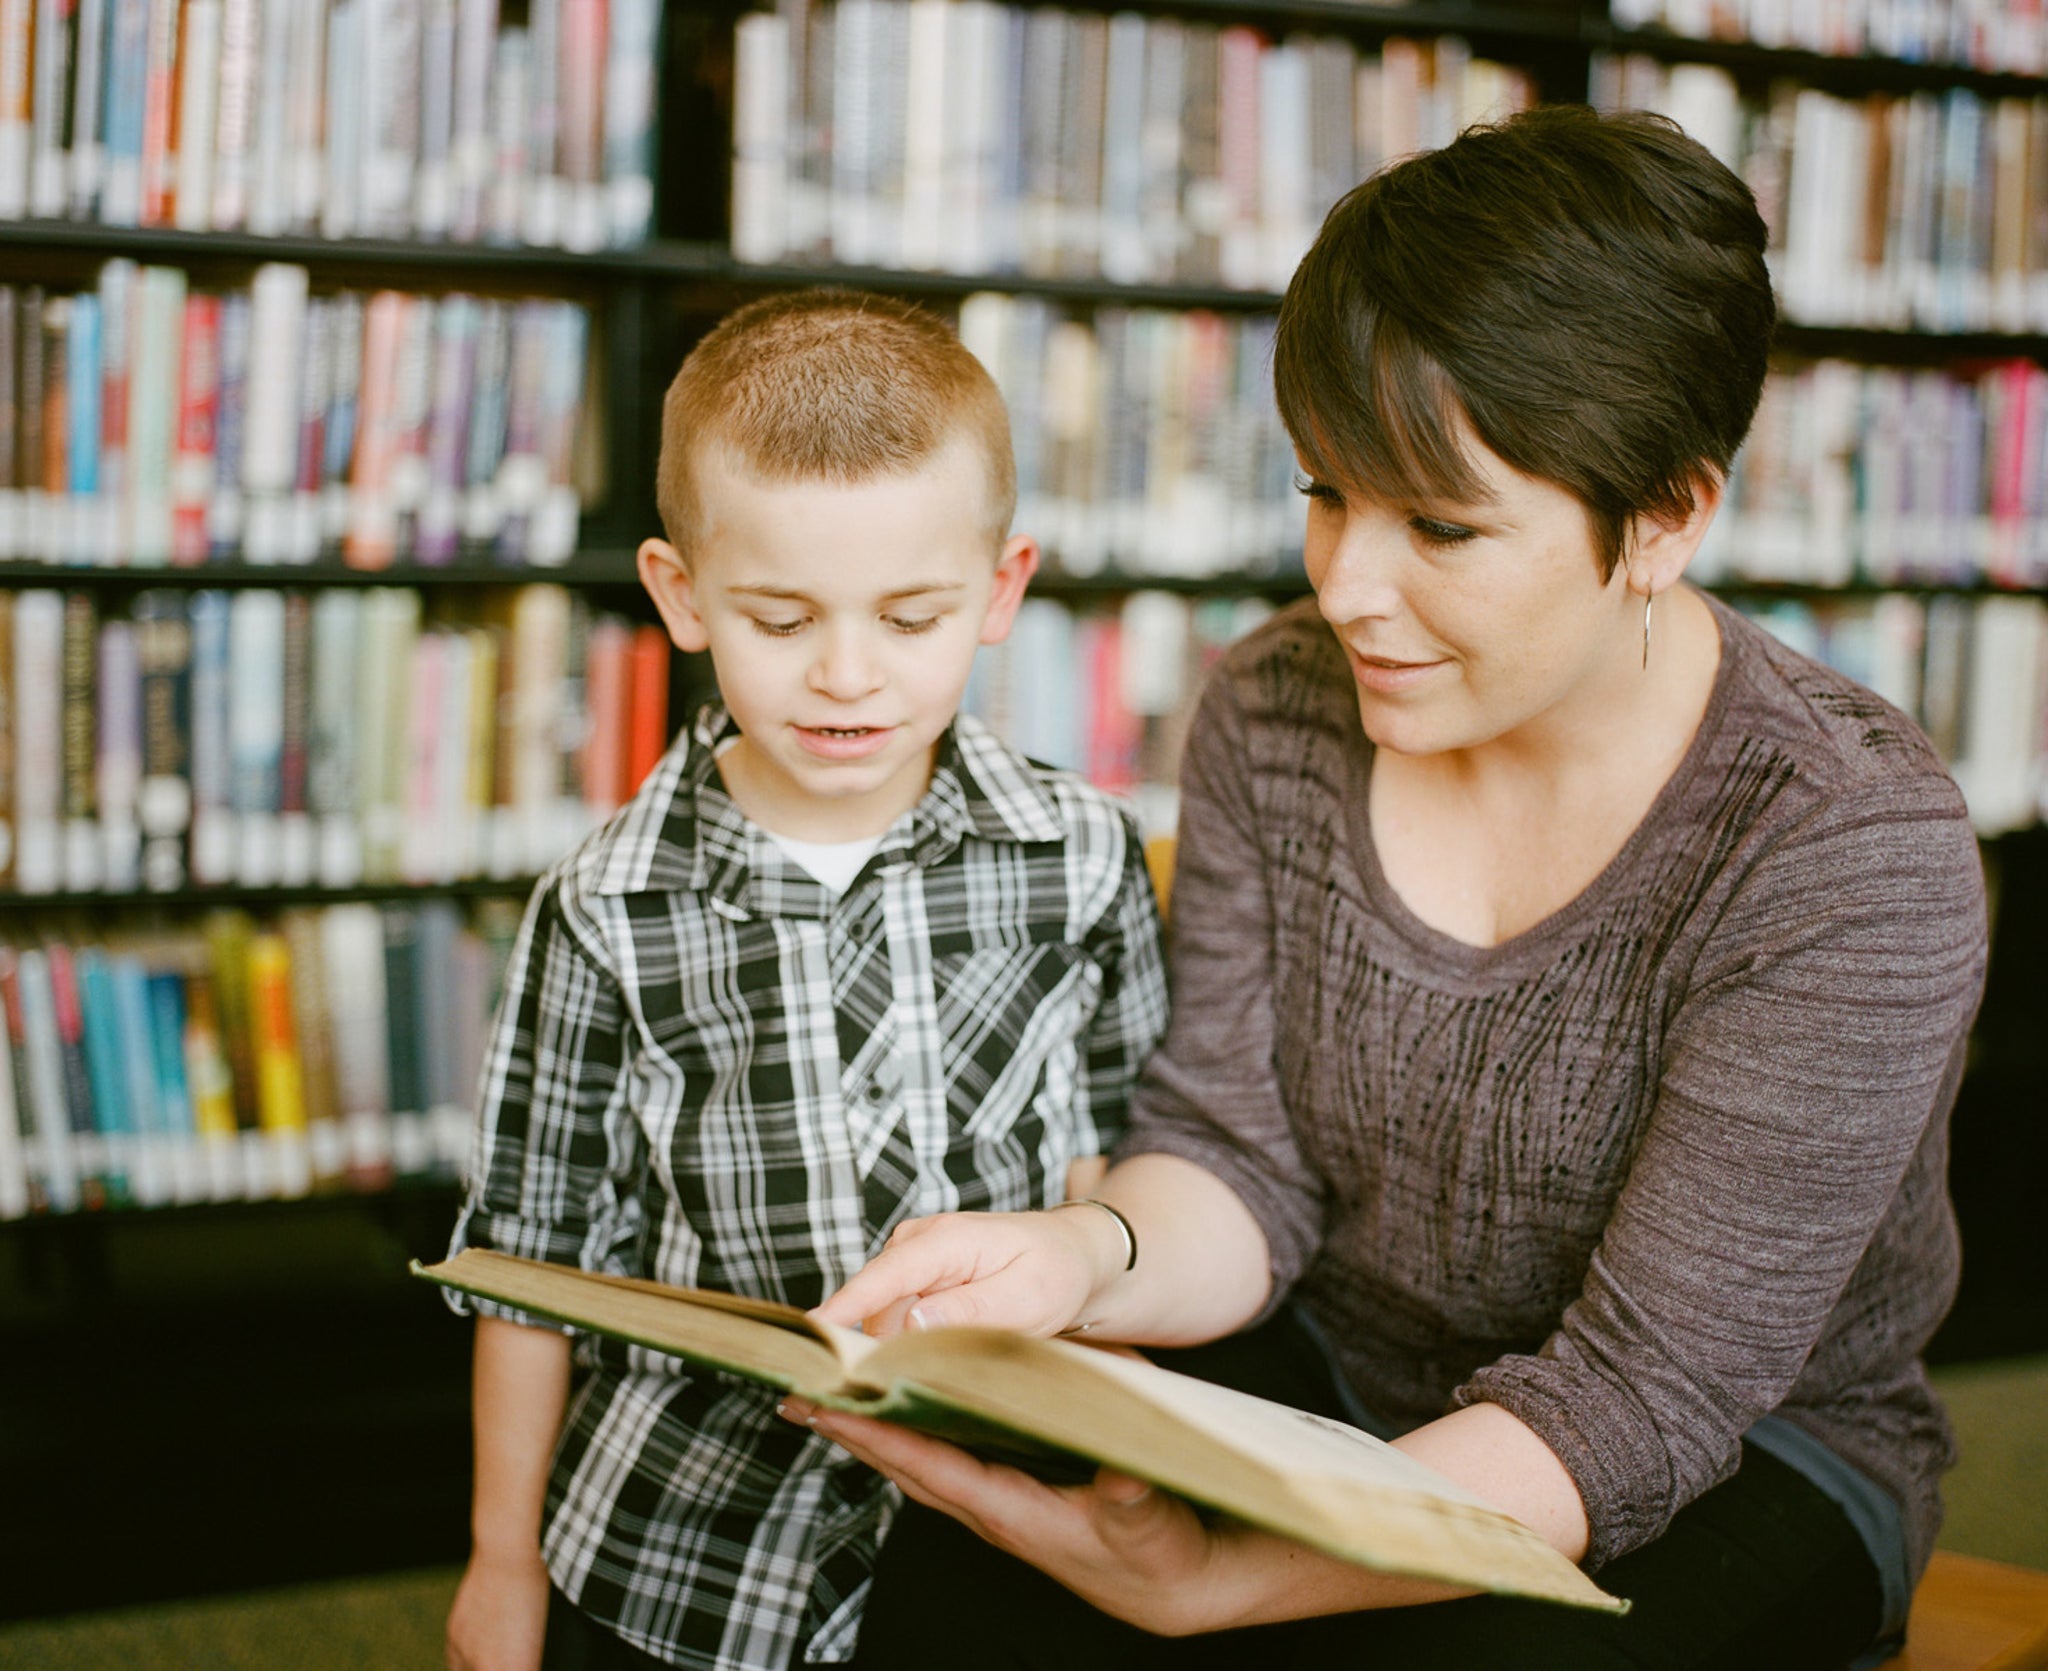 Taking your children to the library and learning with them may help both of you.